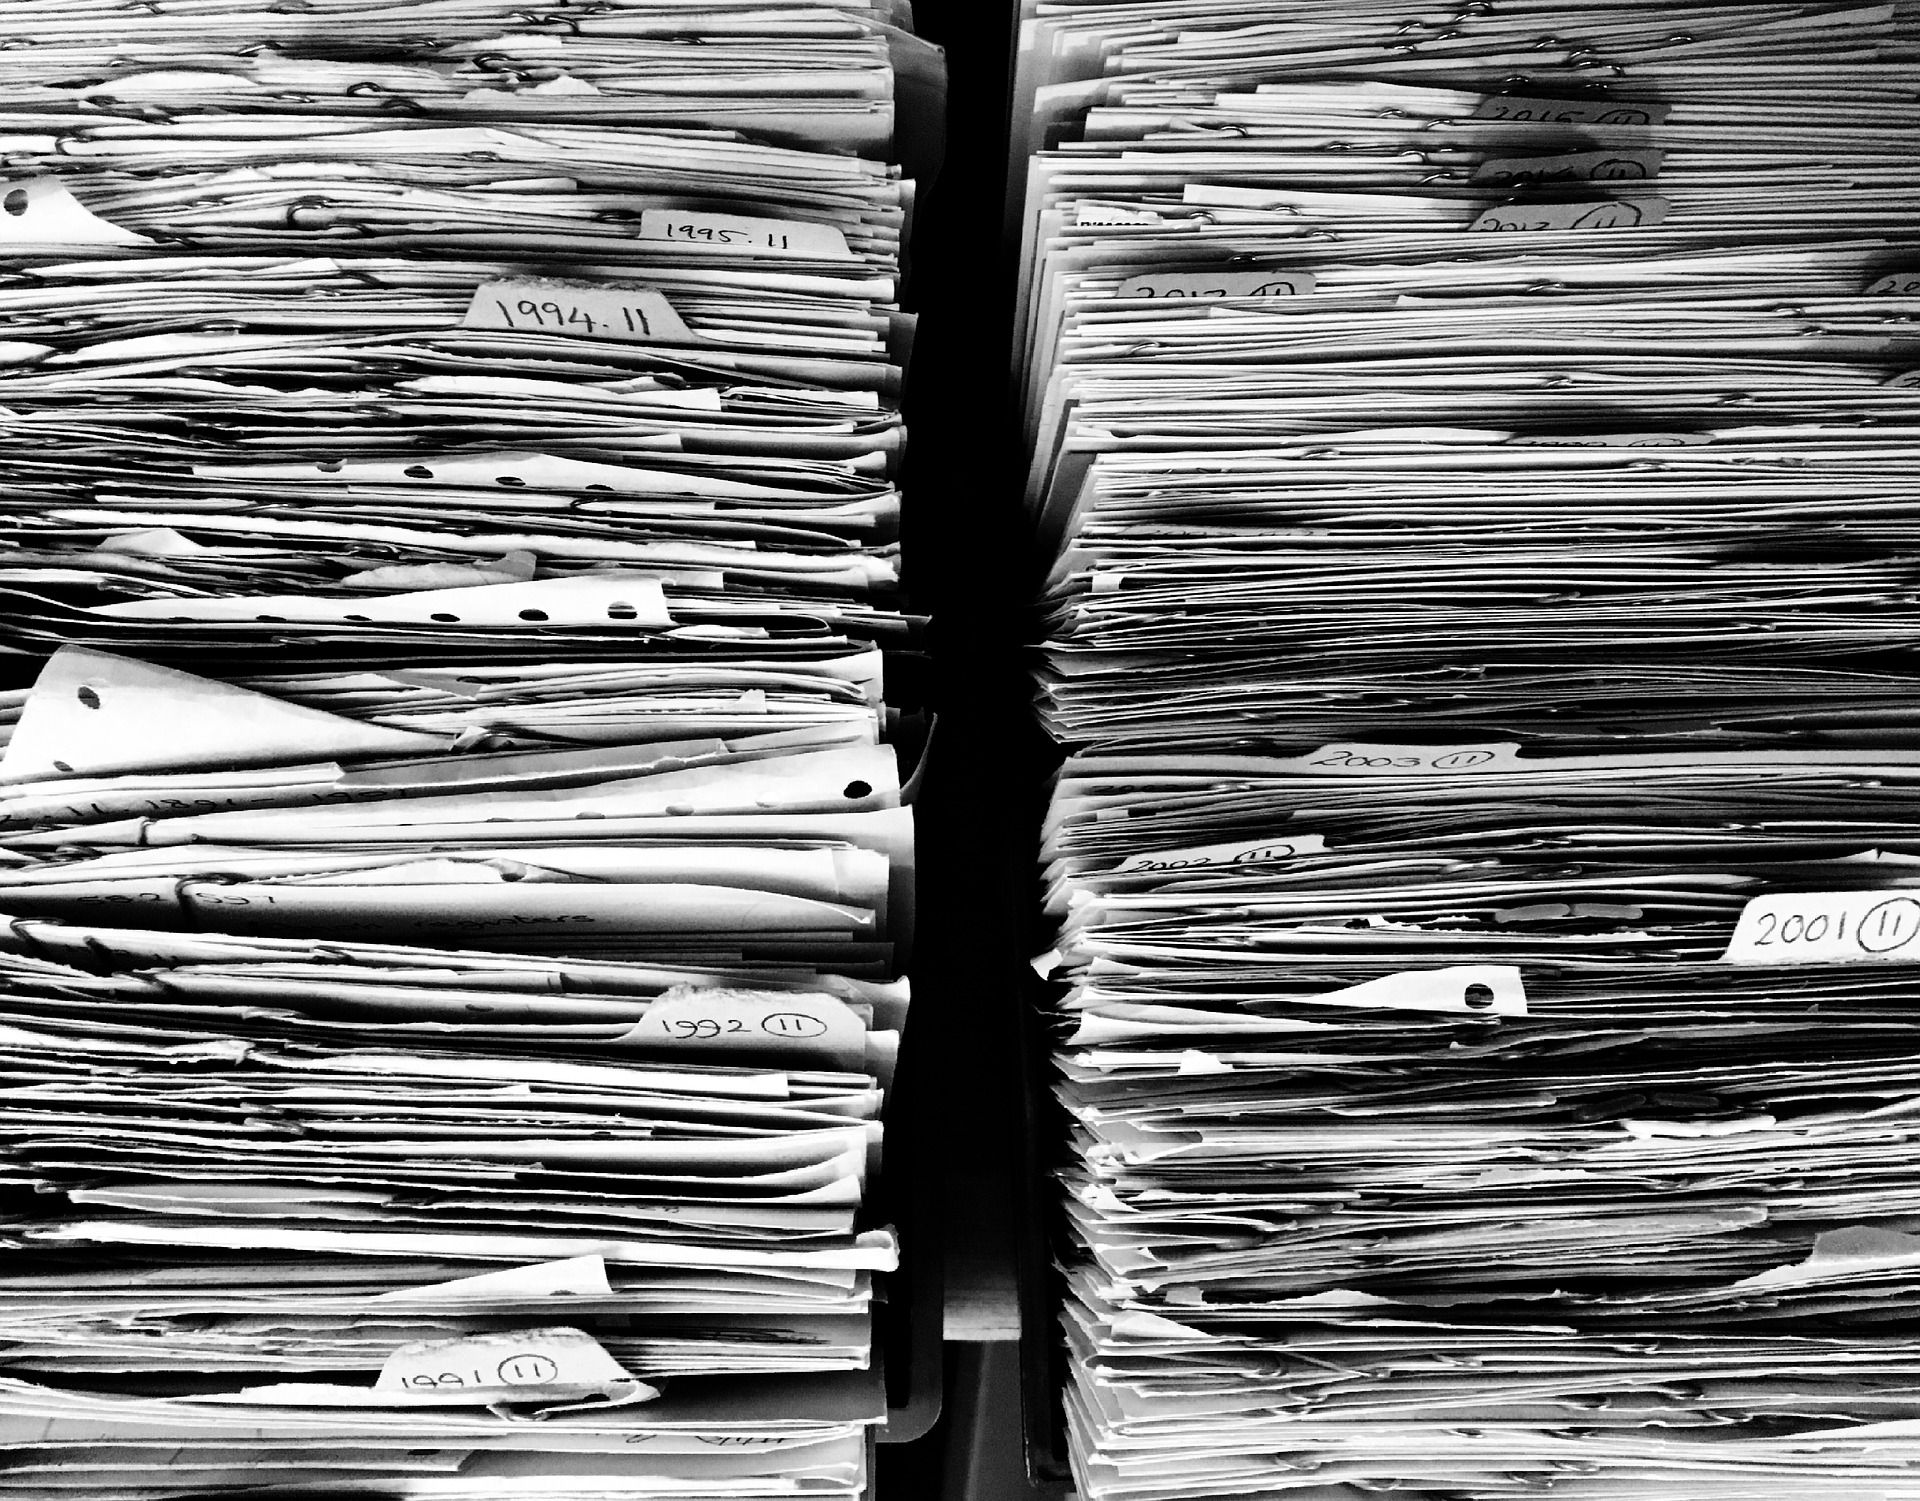 Piles of paper files and documents